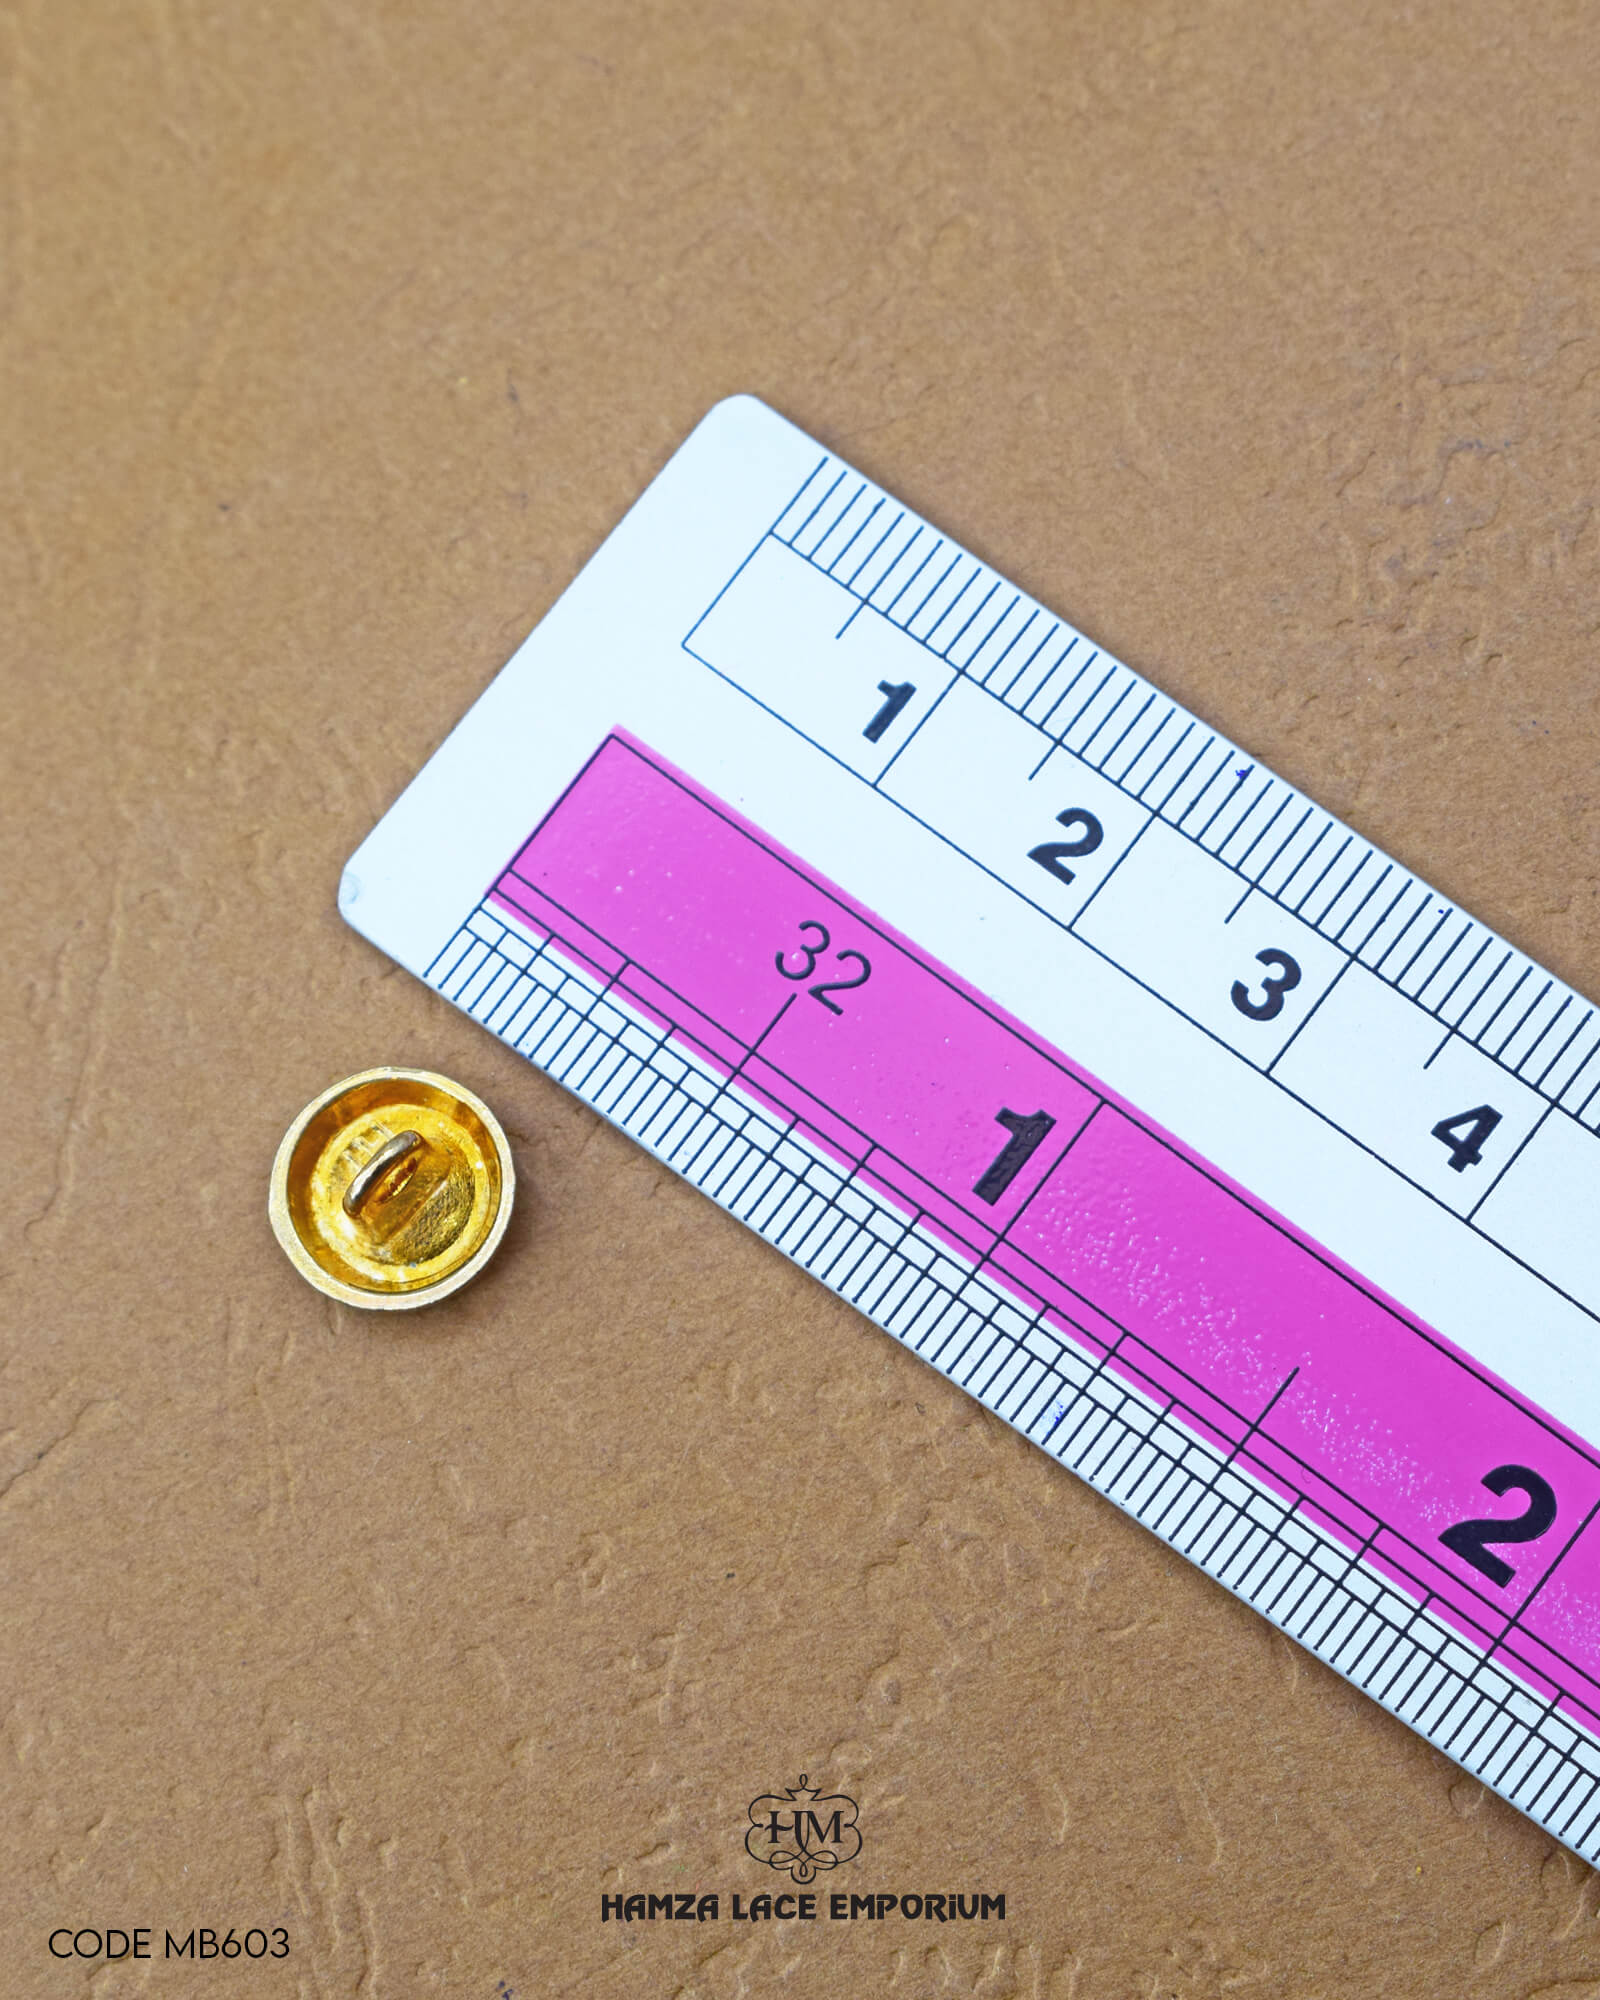 The size of the 'Metal Suiting Button MB603' is measured using a ruler.